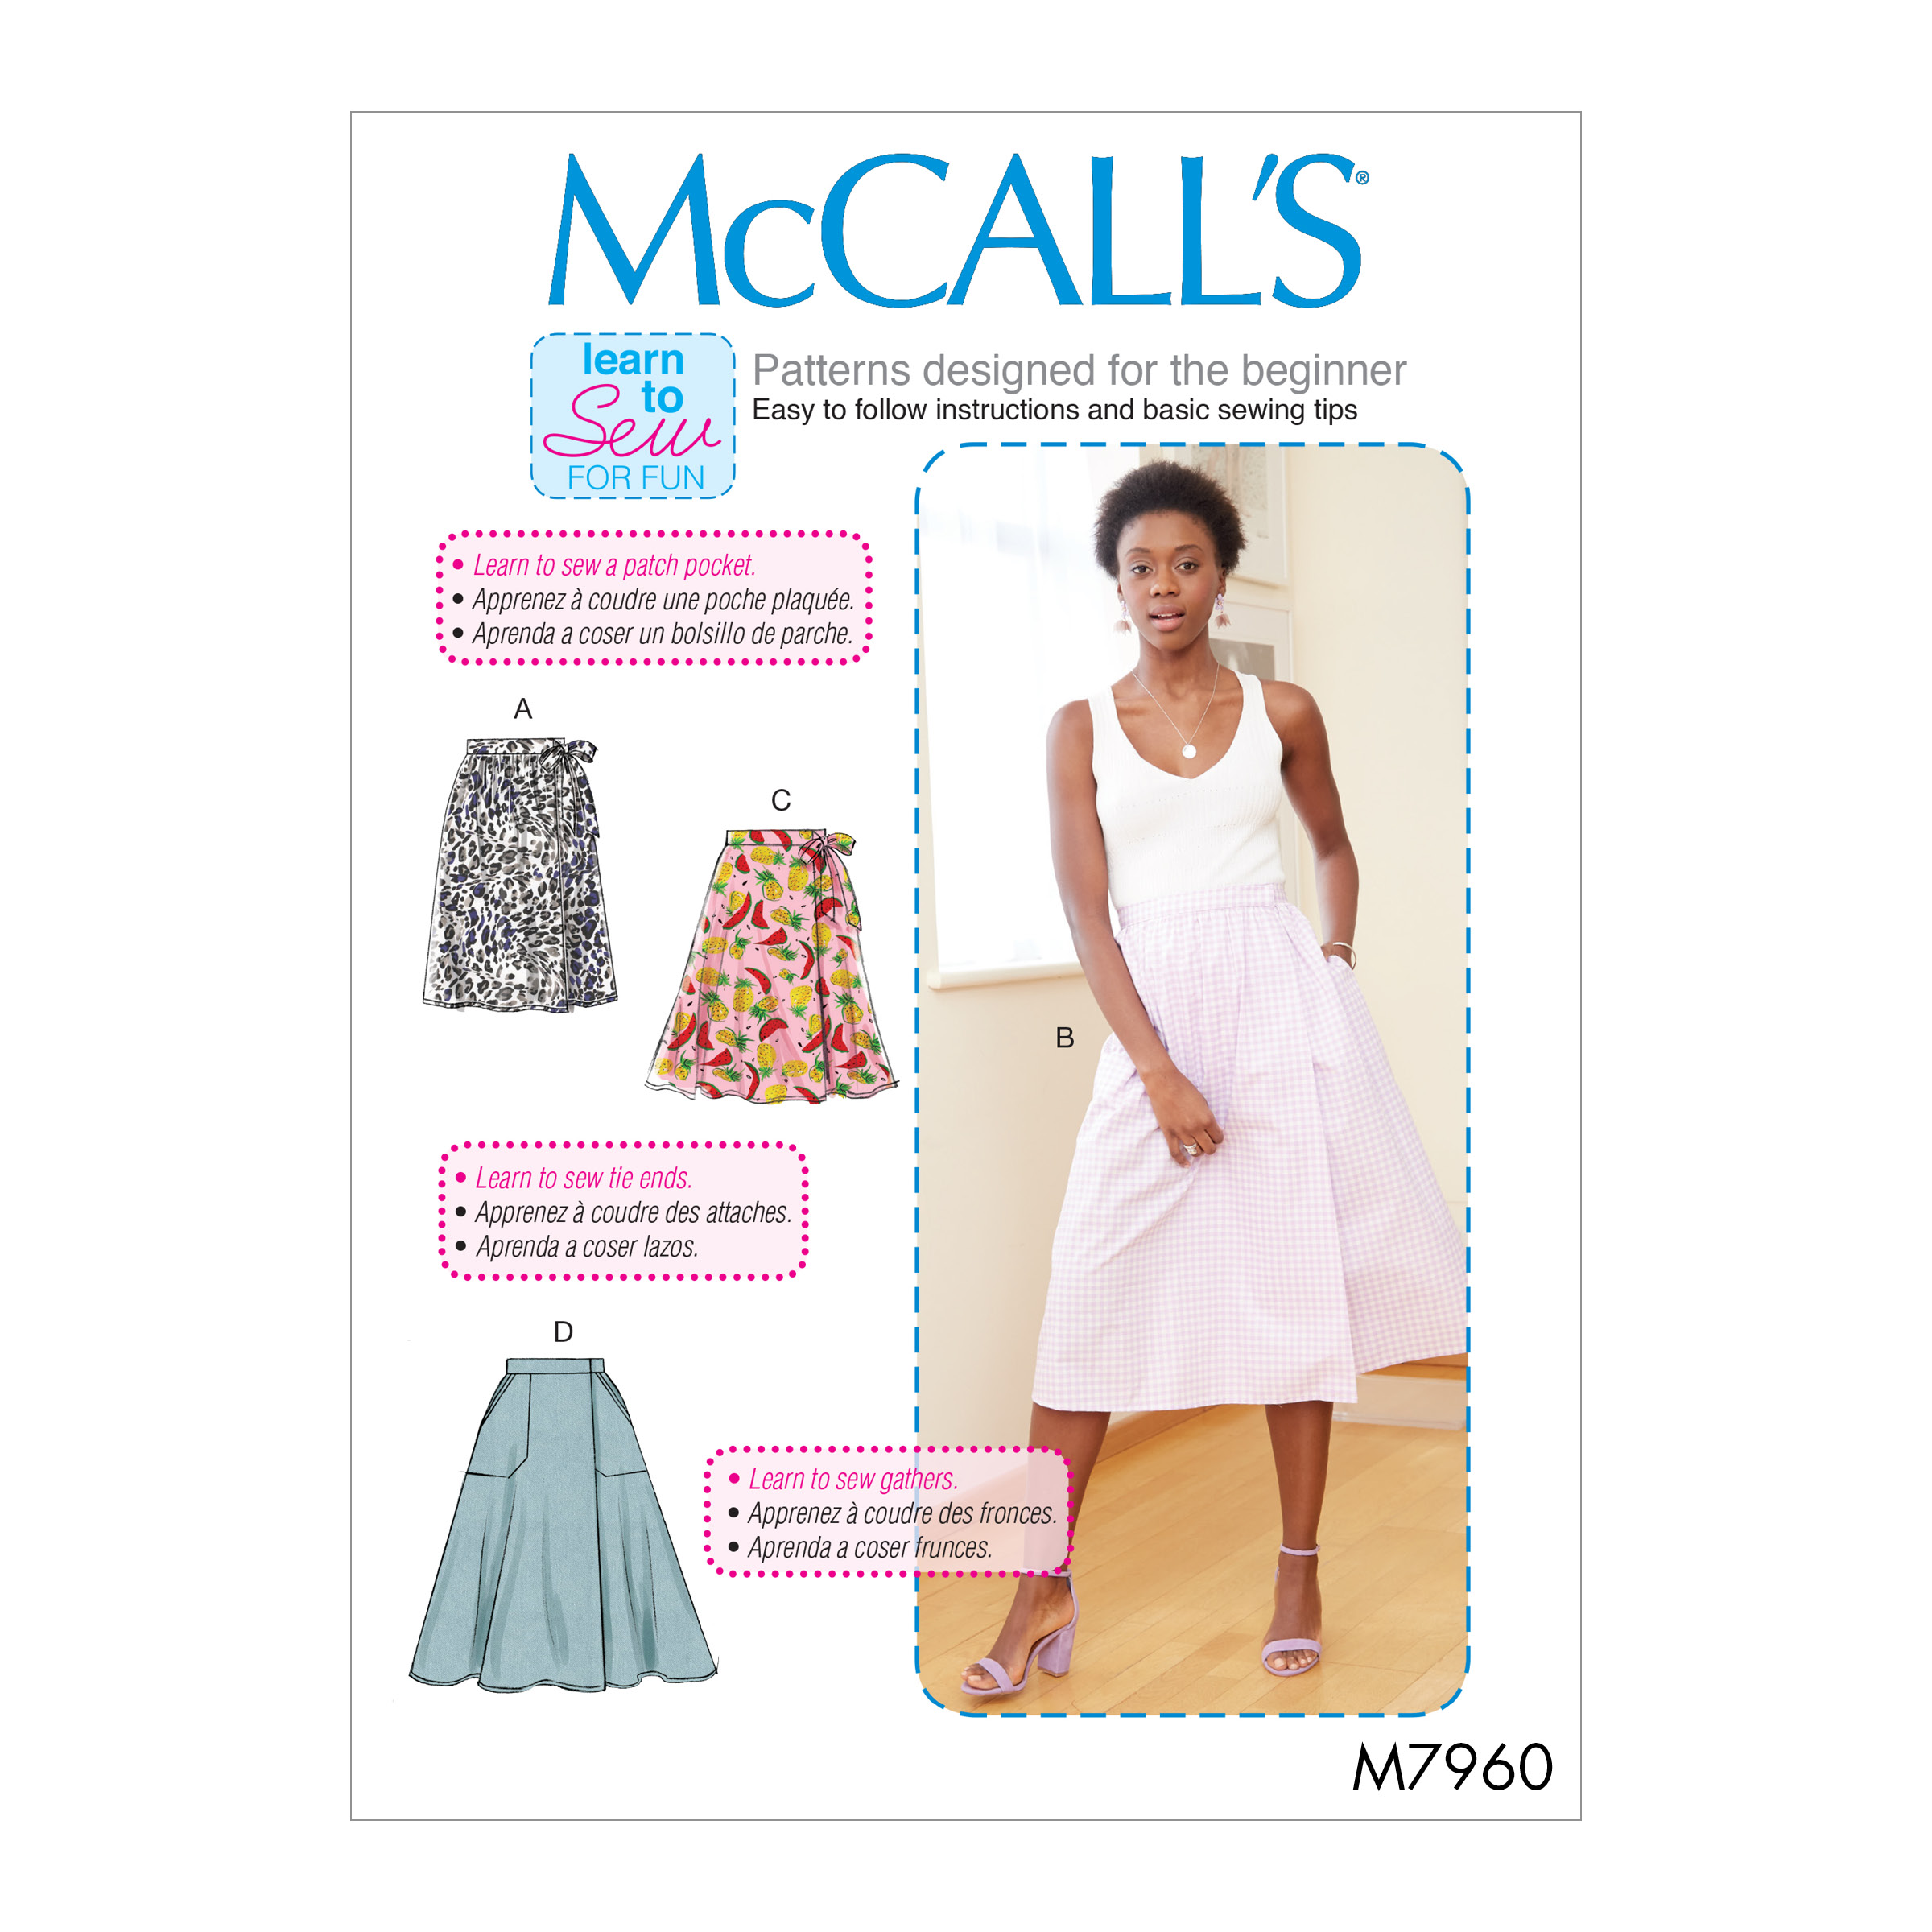 https://images.patternreview.com/sewing/patterns/mccall/2019/7960/7960.jpg